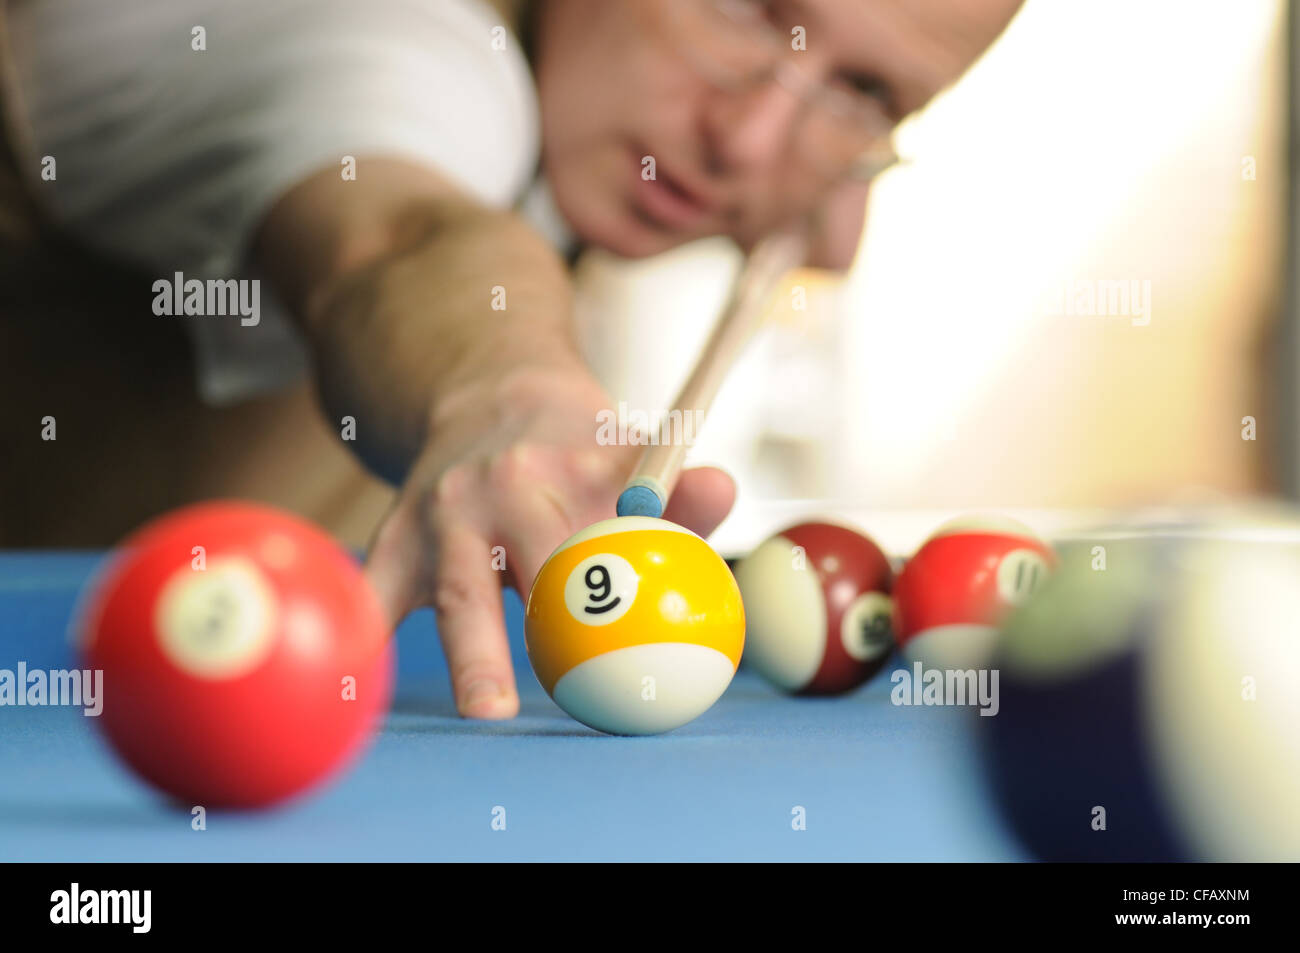 Billiard, hit, exactly, just, ball, sphere, spare time, hobby, precision, aim, hit, play Stock Photo